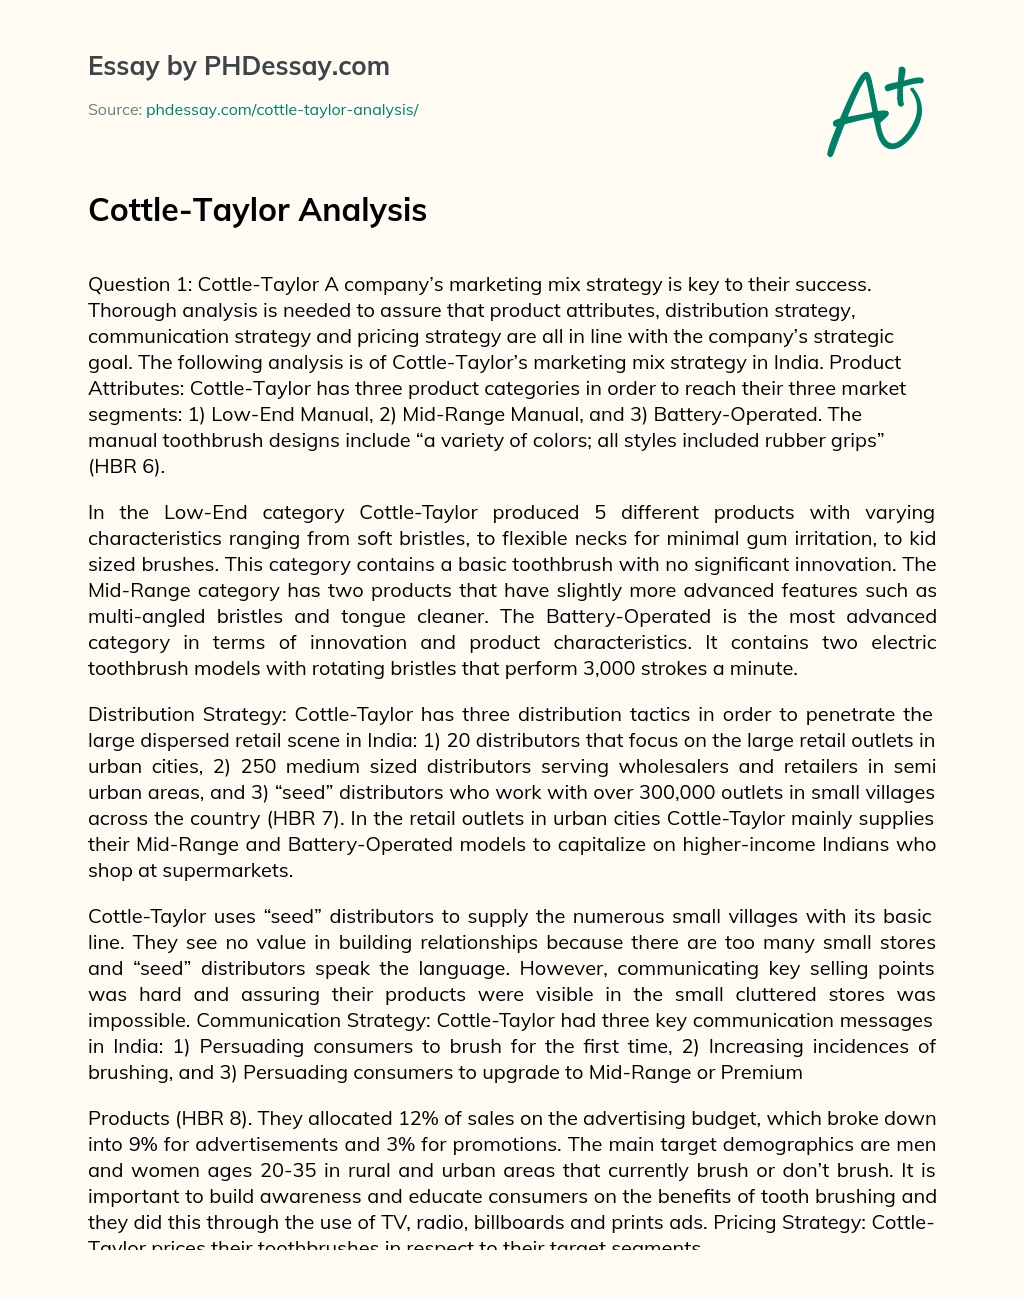 Cottle-Taylor Analysis essay